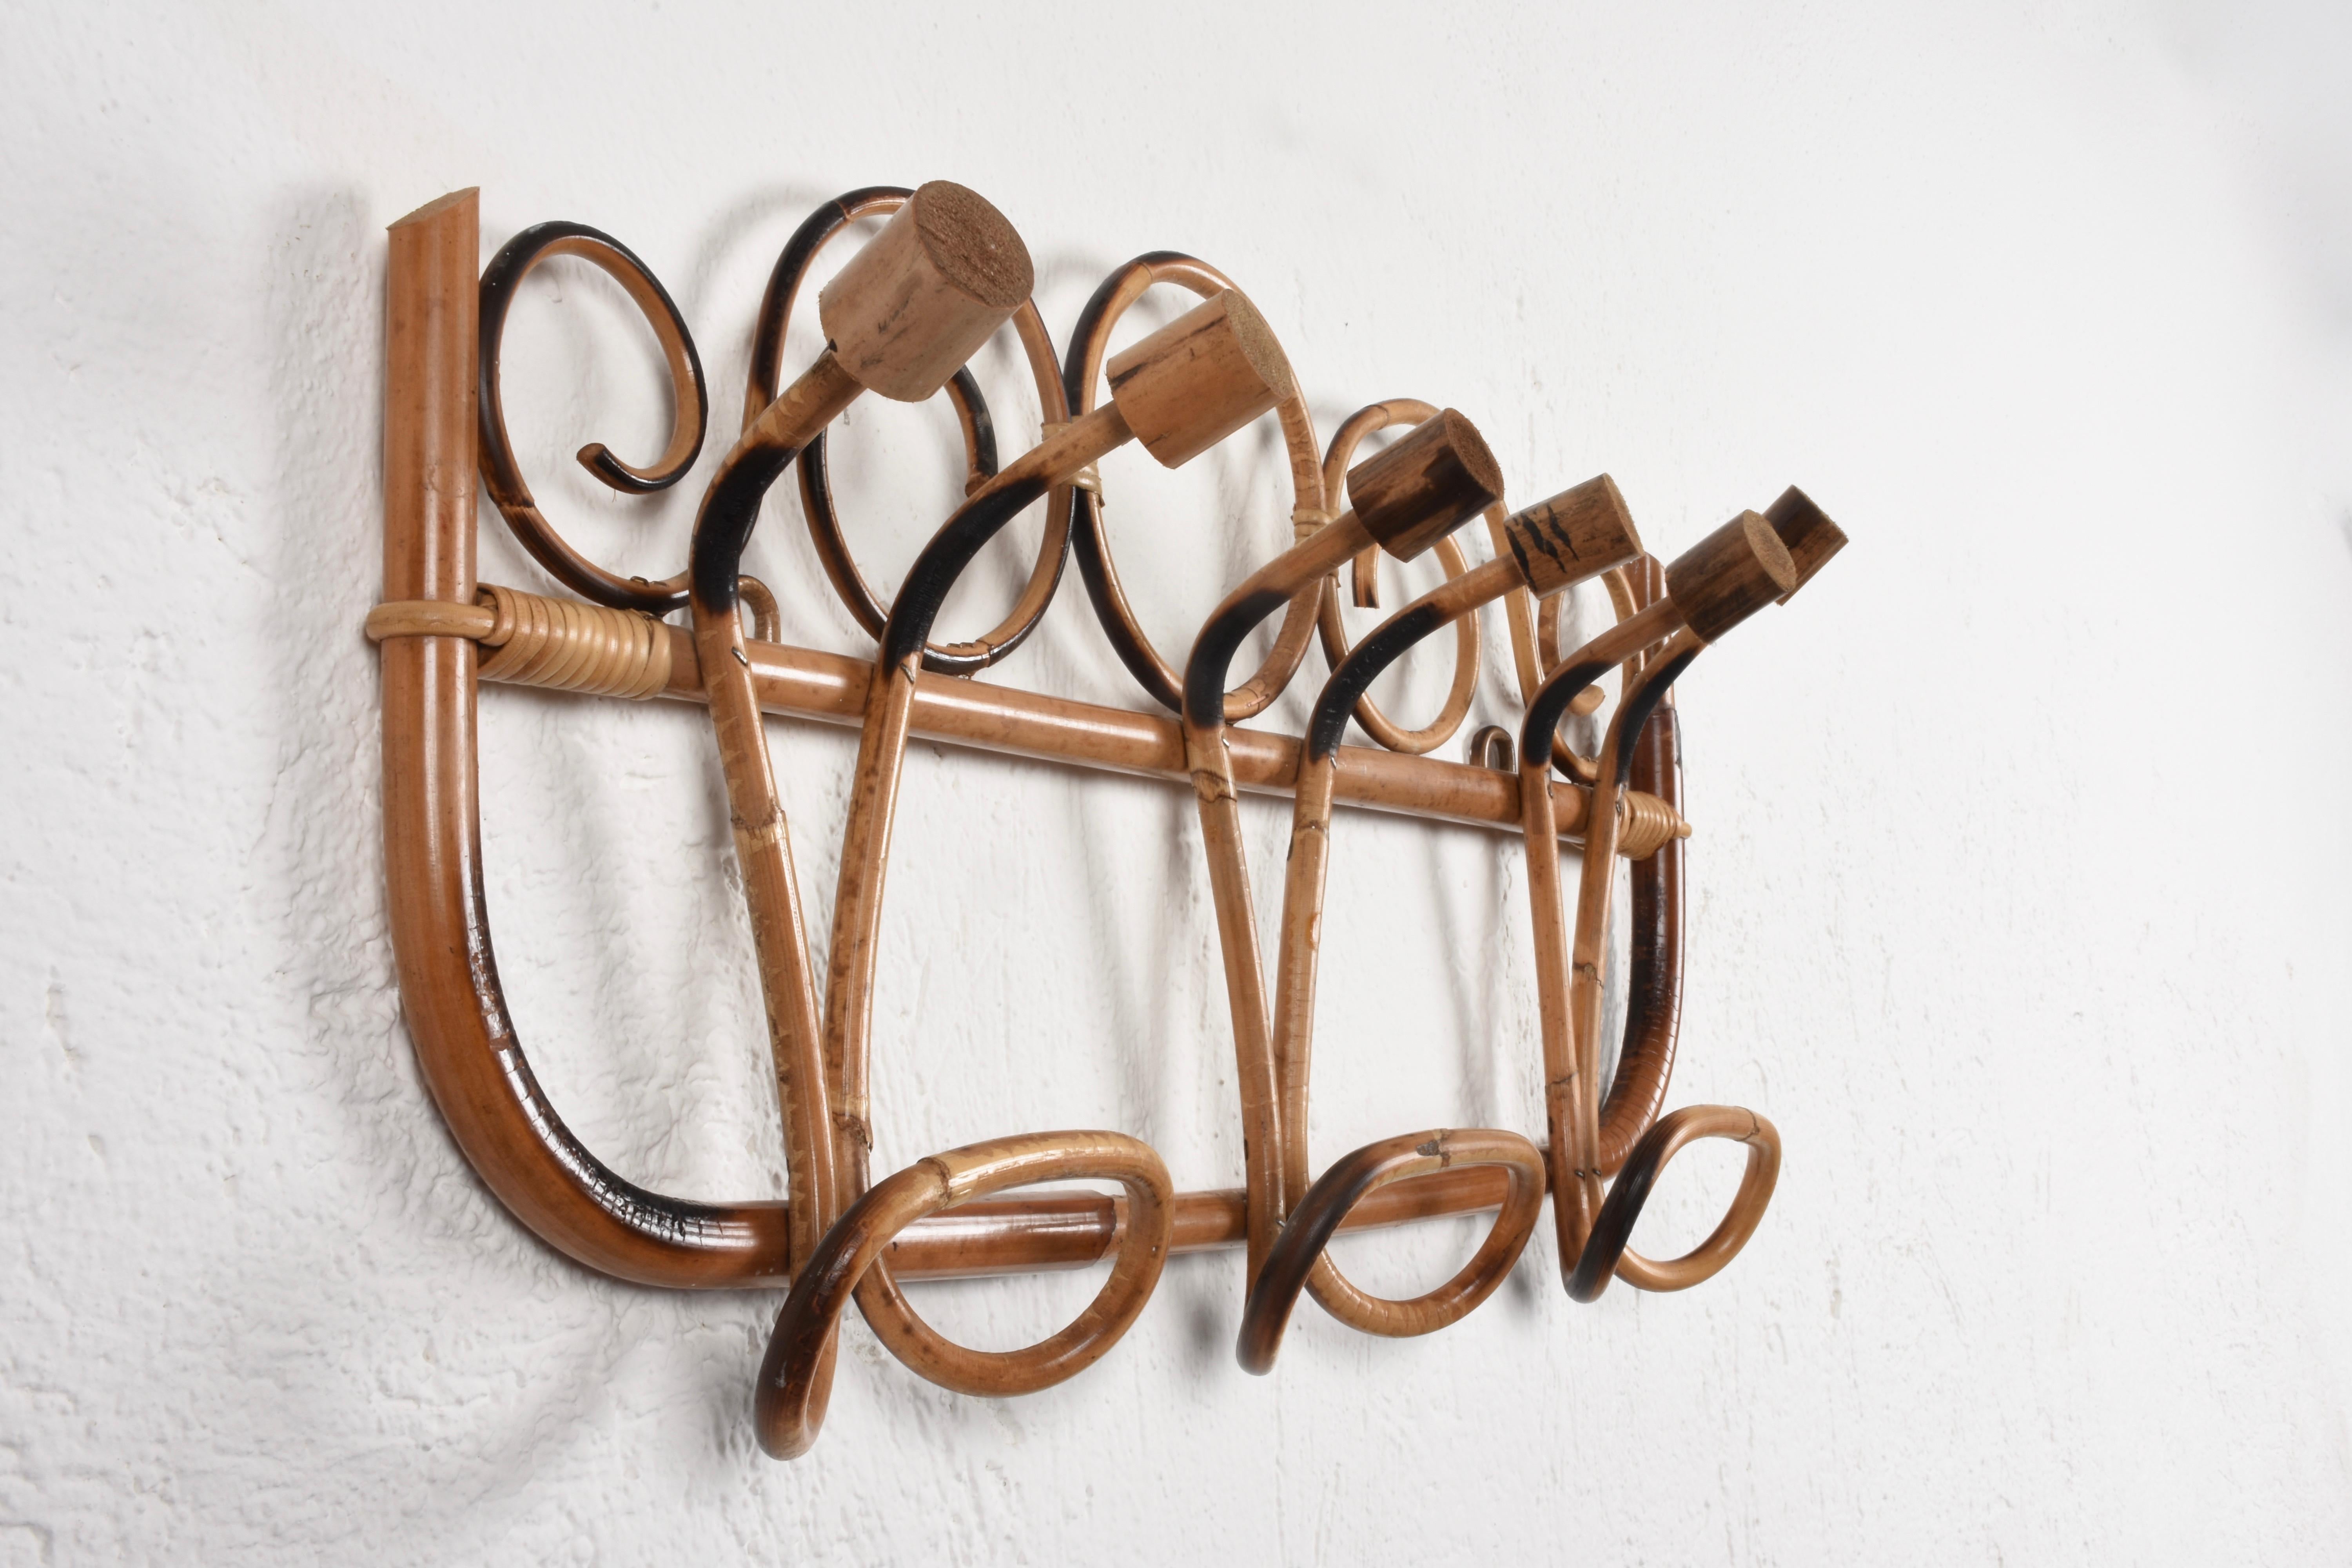 This beautiful midcentury rattan and bamboo coat hanger.

The piece was produced in Italy in 1961 and features six upper hooks and three lower hooks for hanging clothes.

An amazing item that will enrich a midcentury living room or entrance hall.